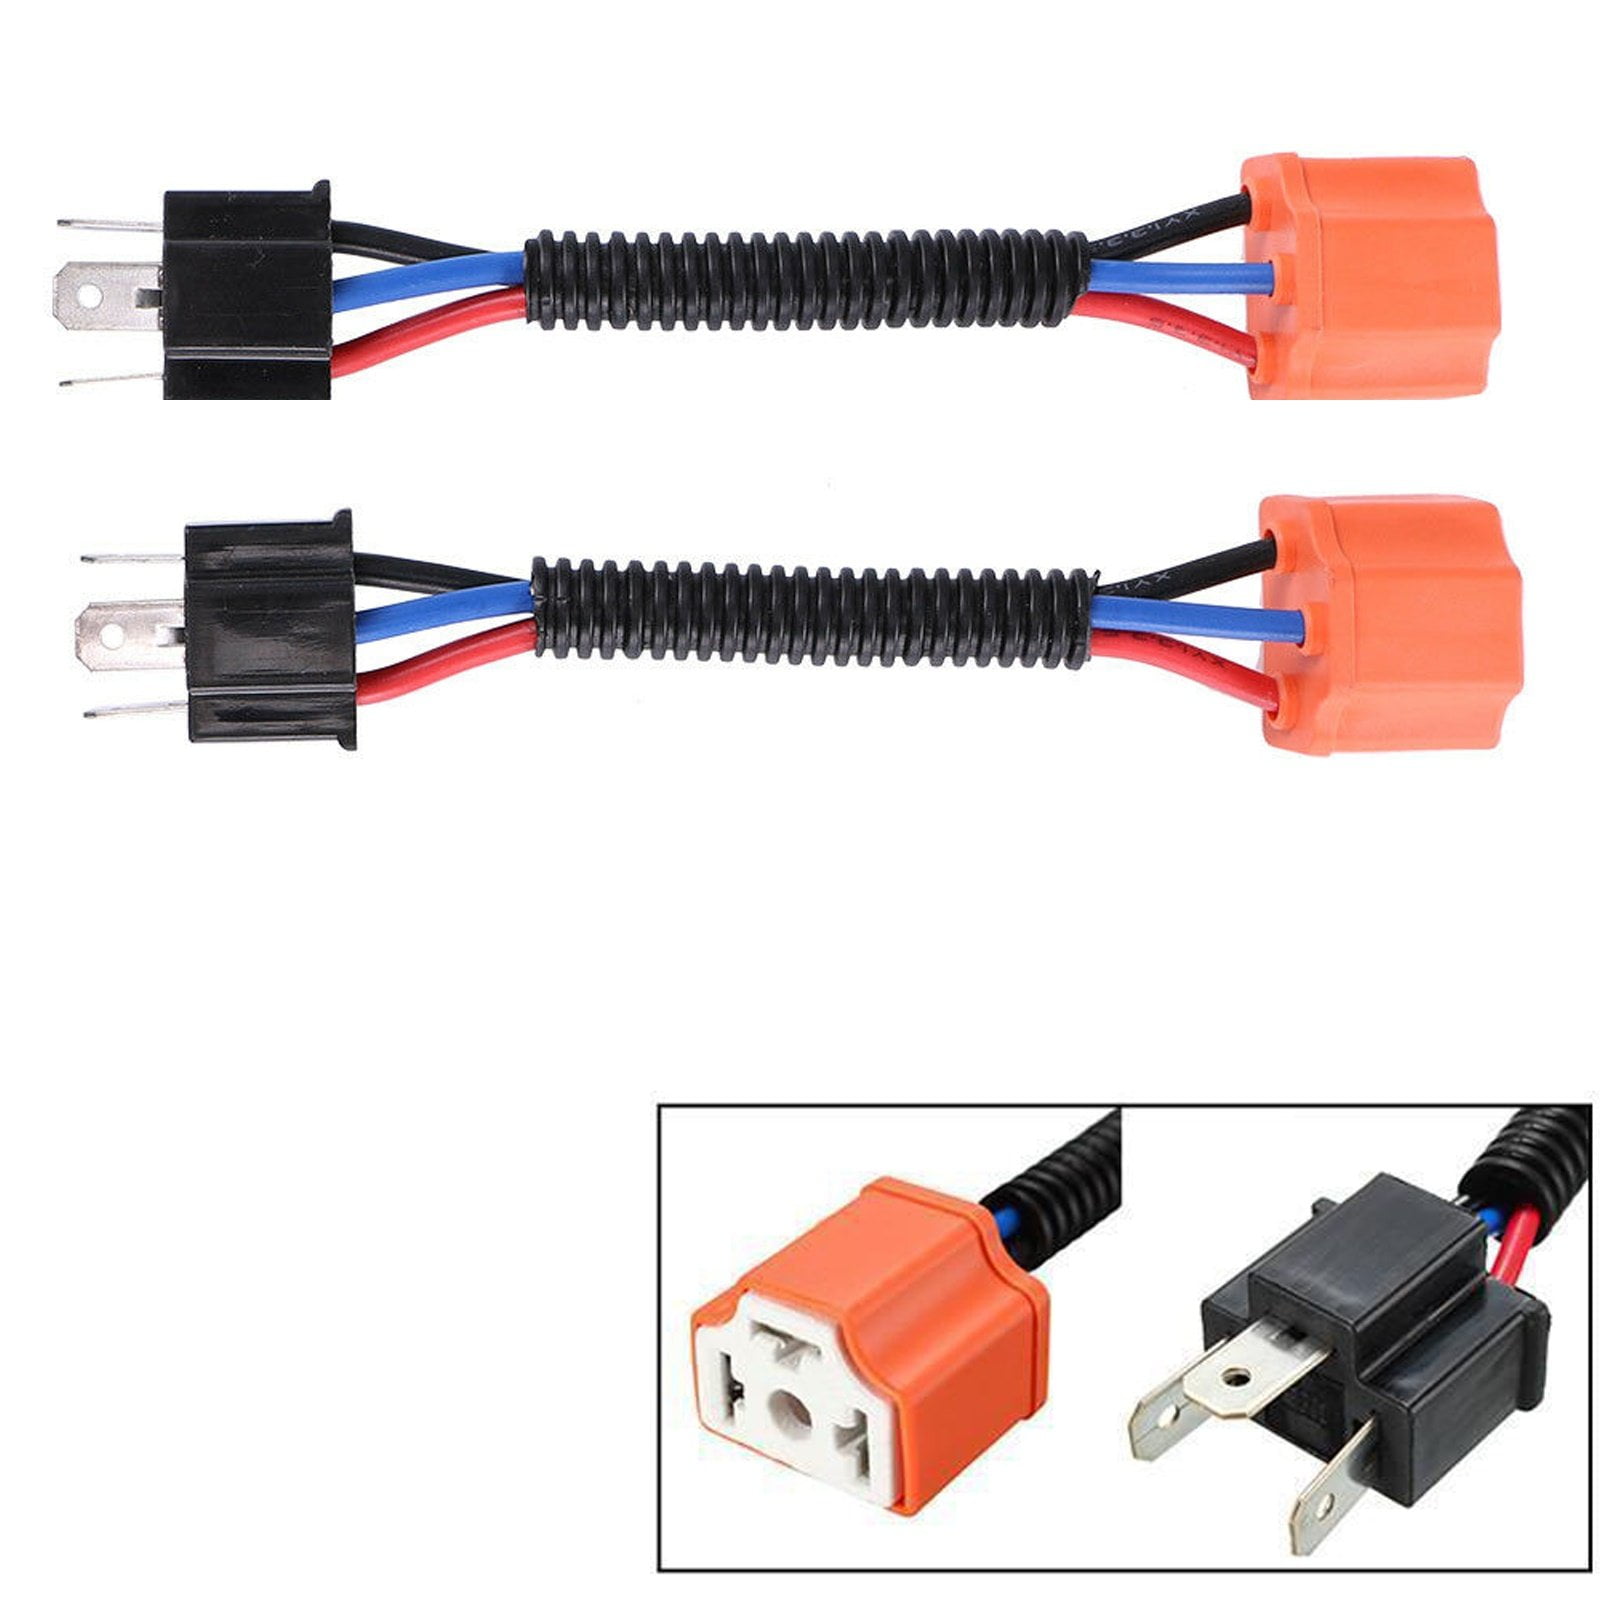 DunGu H4 Adapter 9003 HB2 Headlight Connector Heavy Duty 14AWG Ceramic Wiring Harness For Car Truck Boat Light Retrofit Pack of 2 